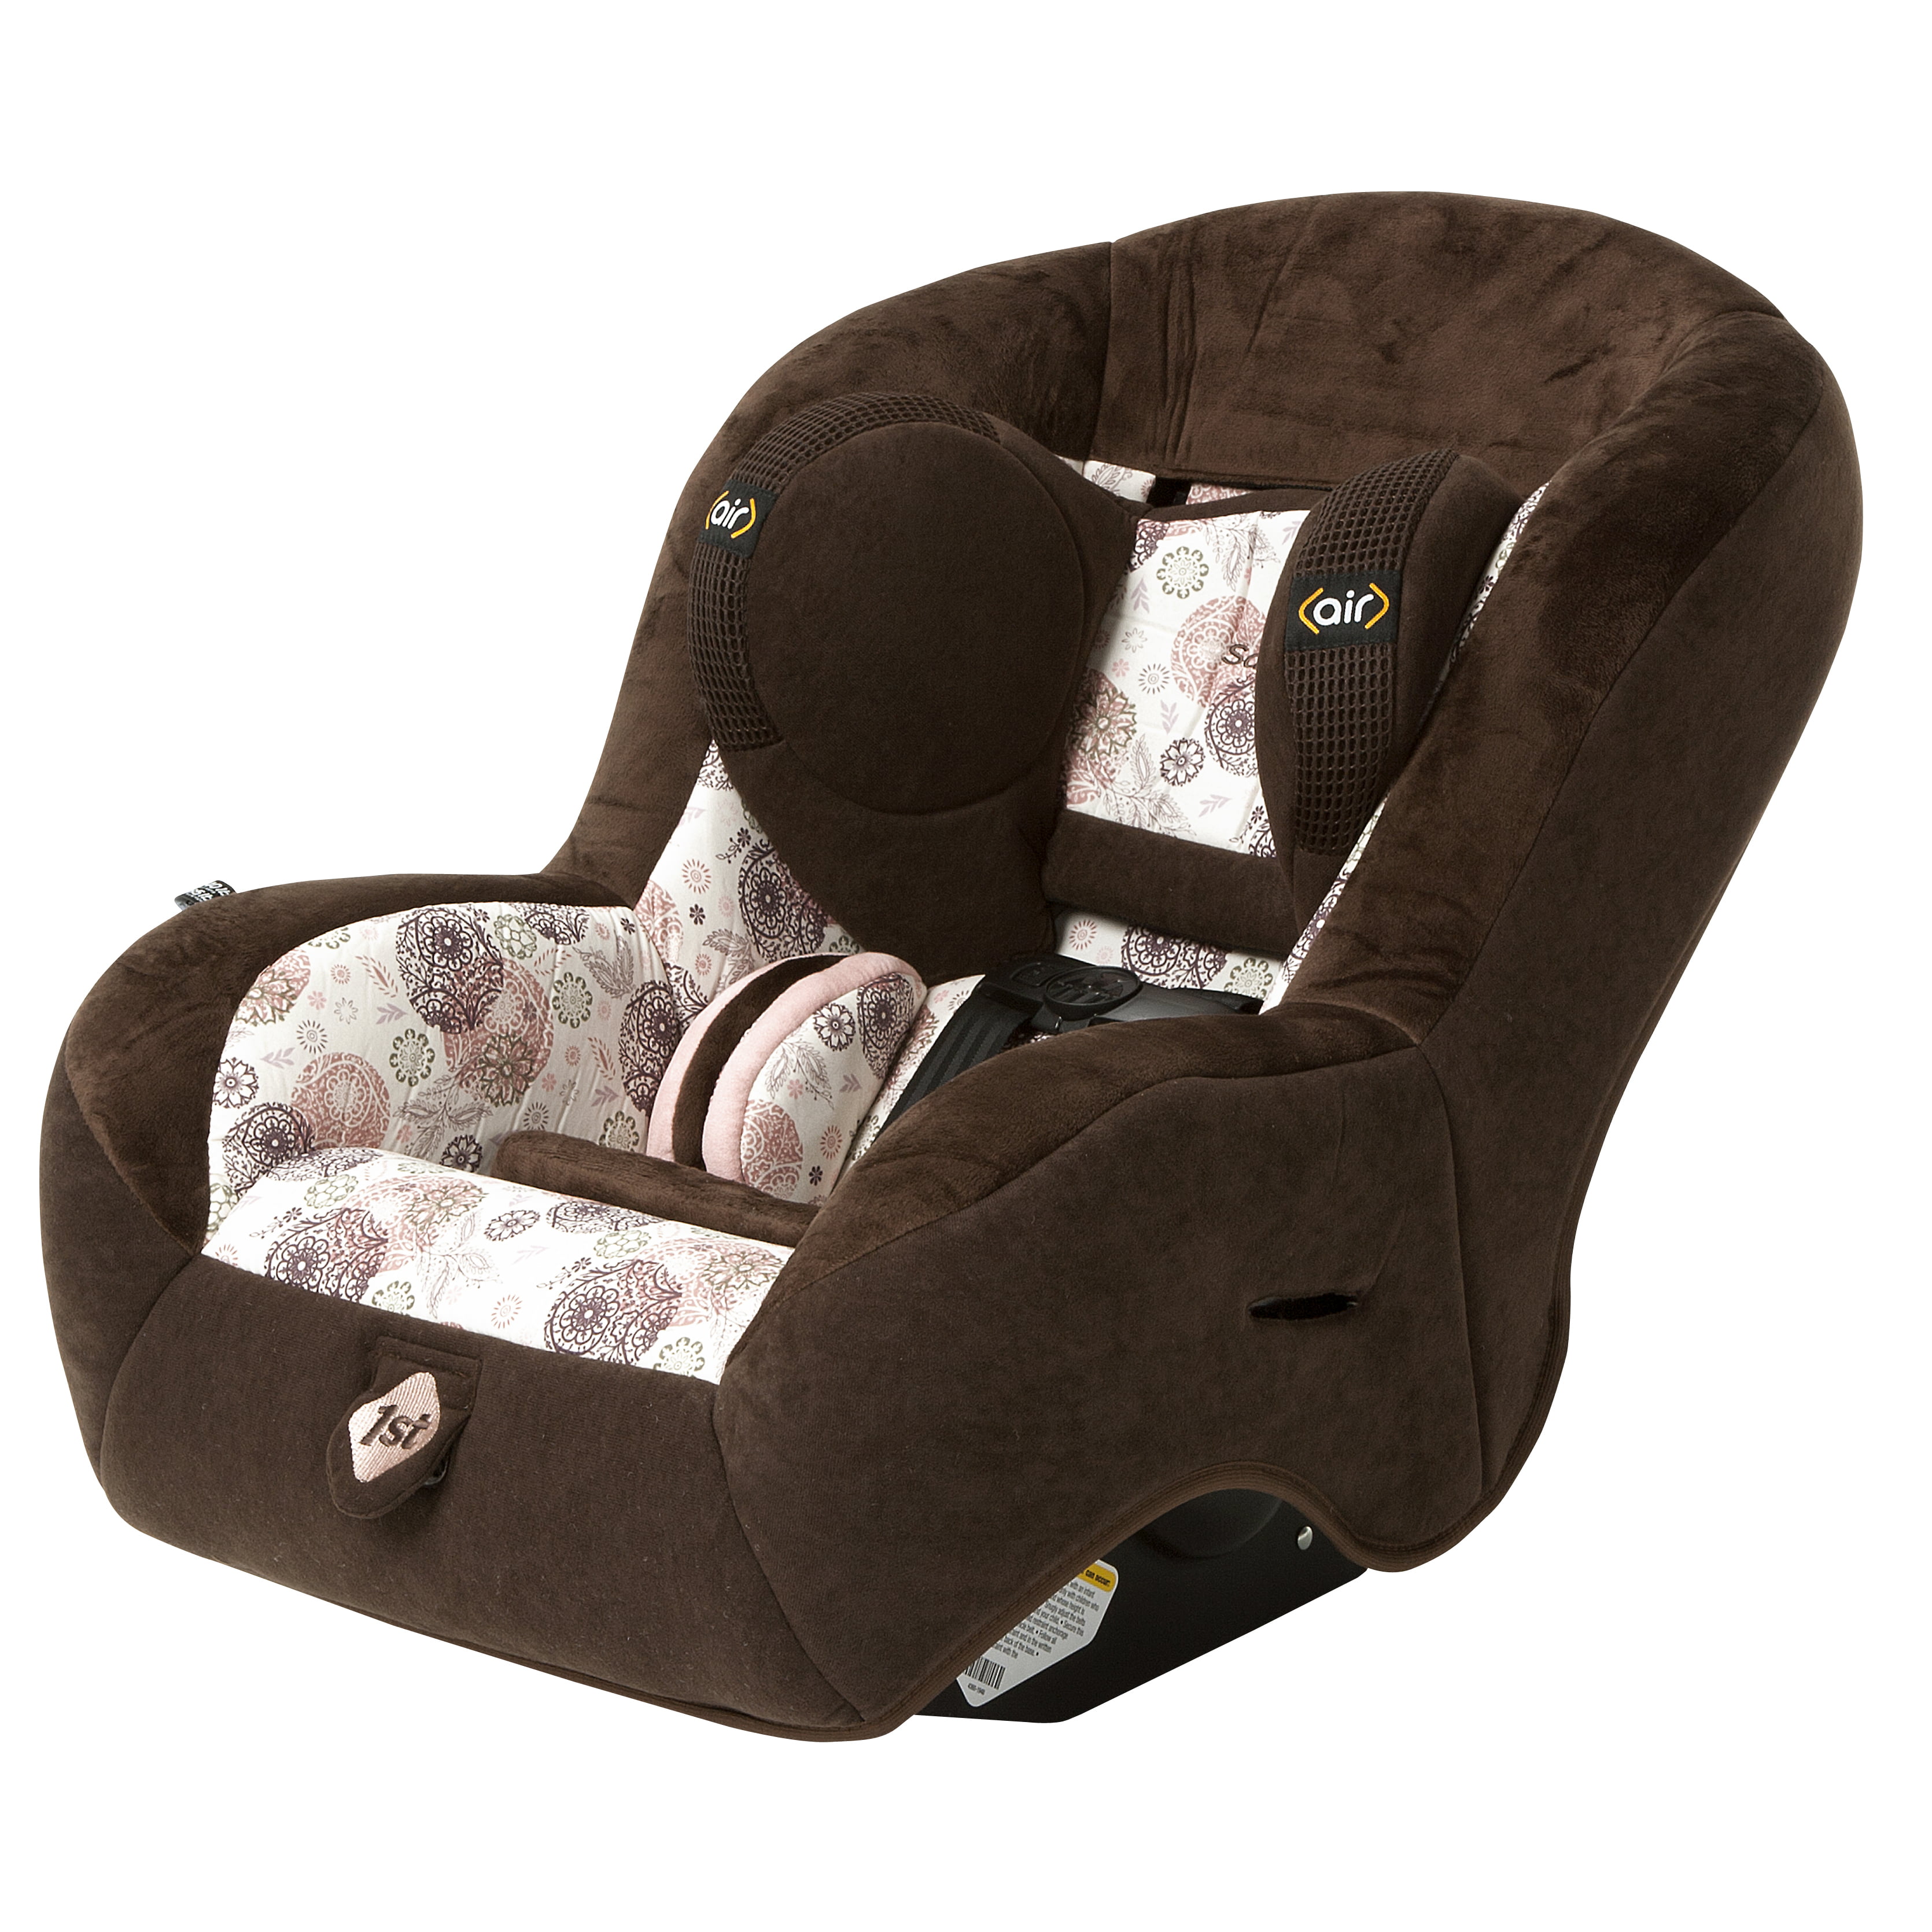 Safety 1st Chart 65 Convertible Car Seat Brown